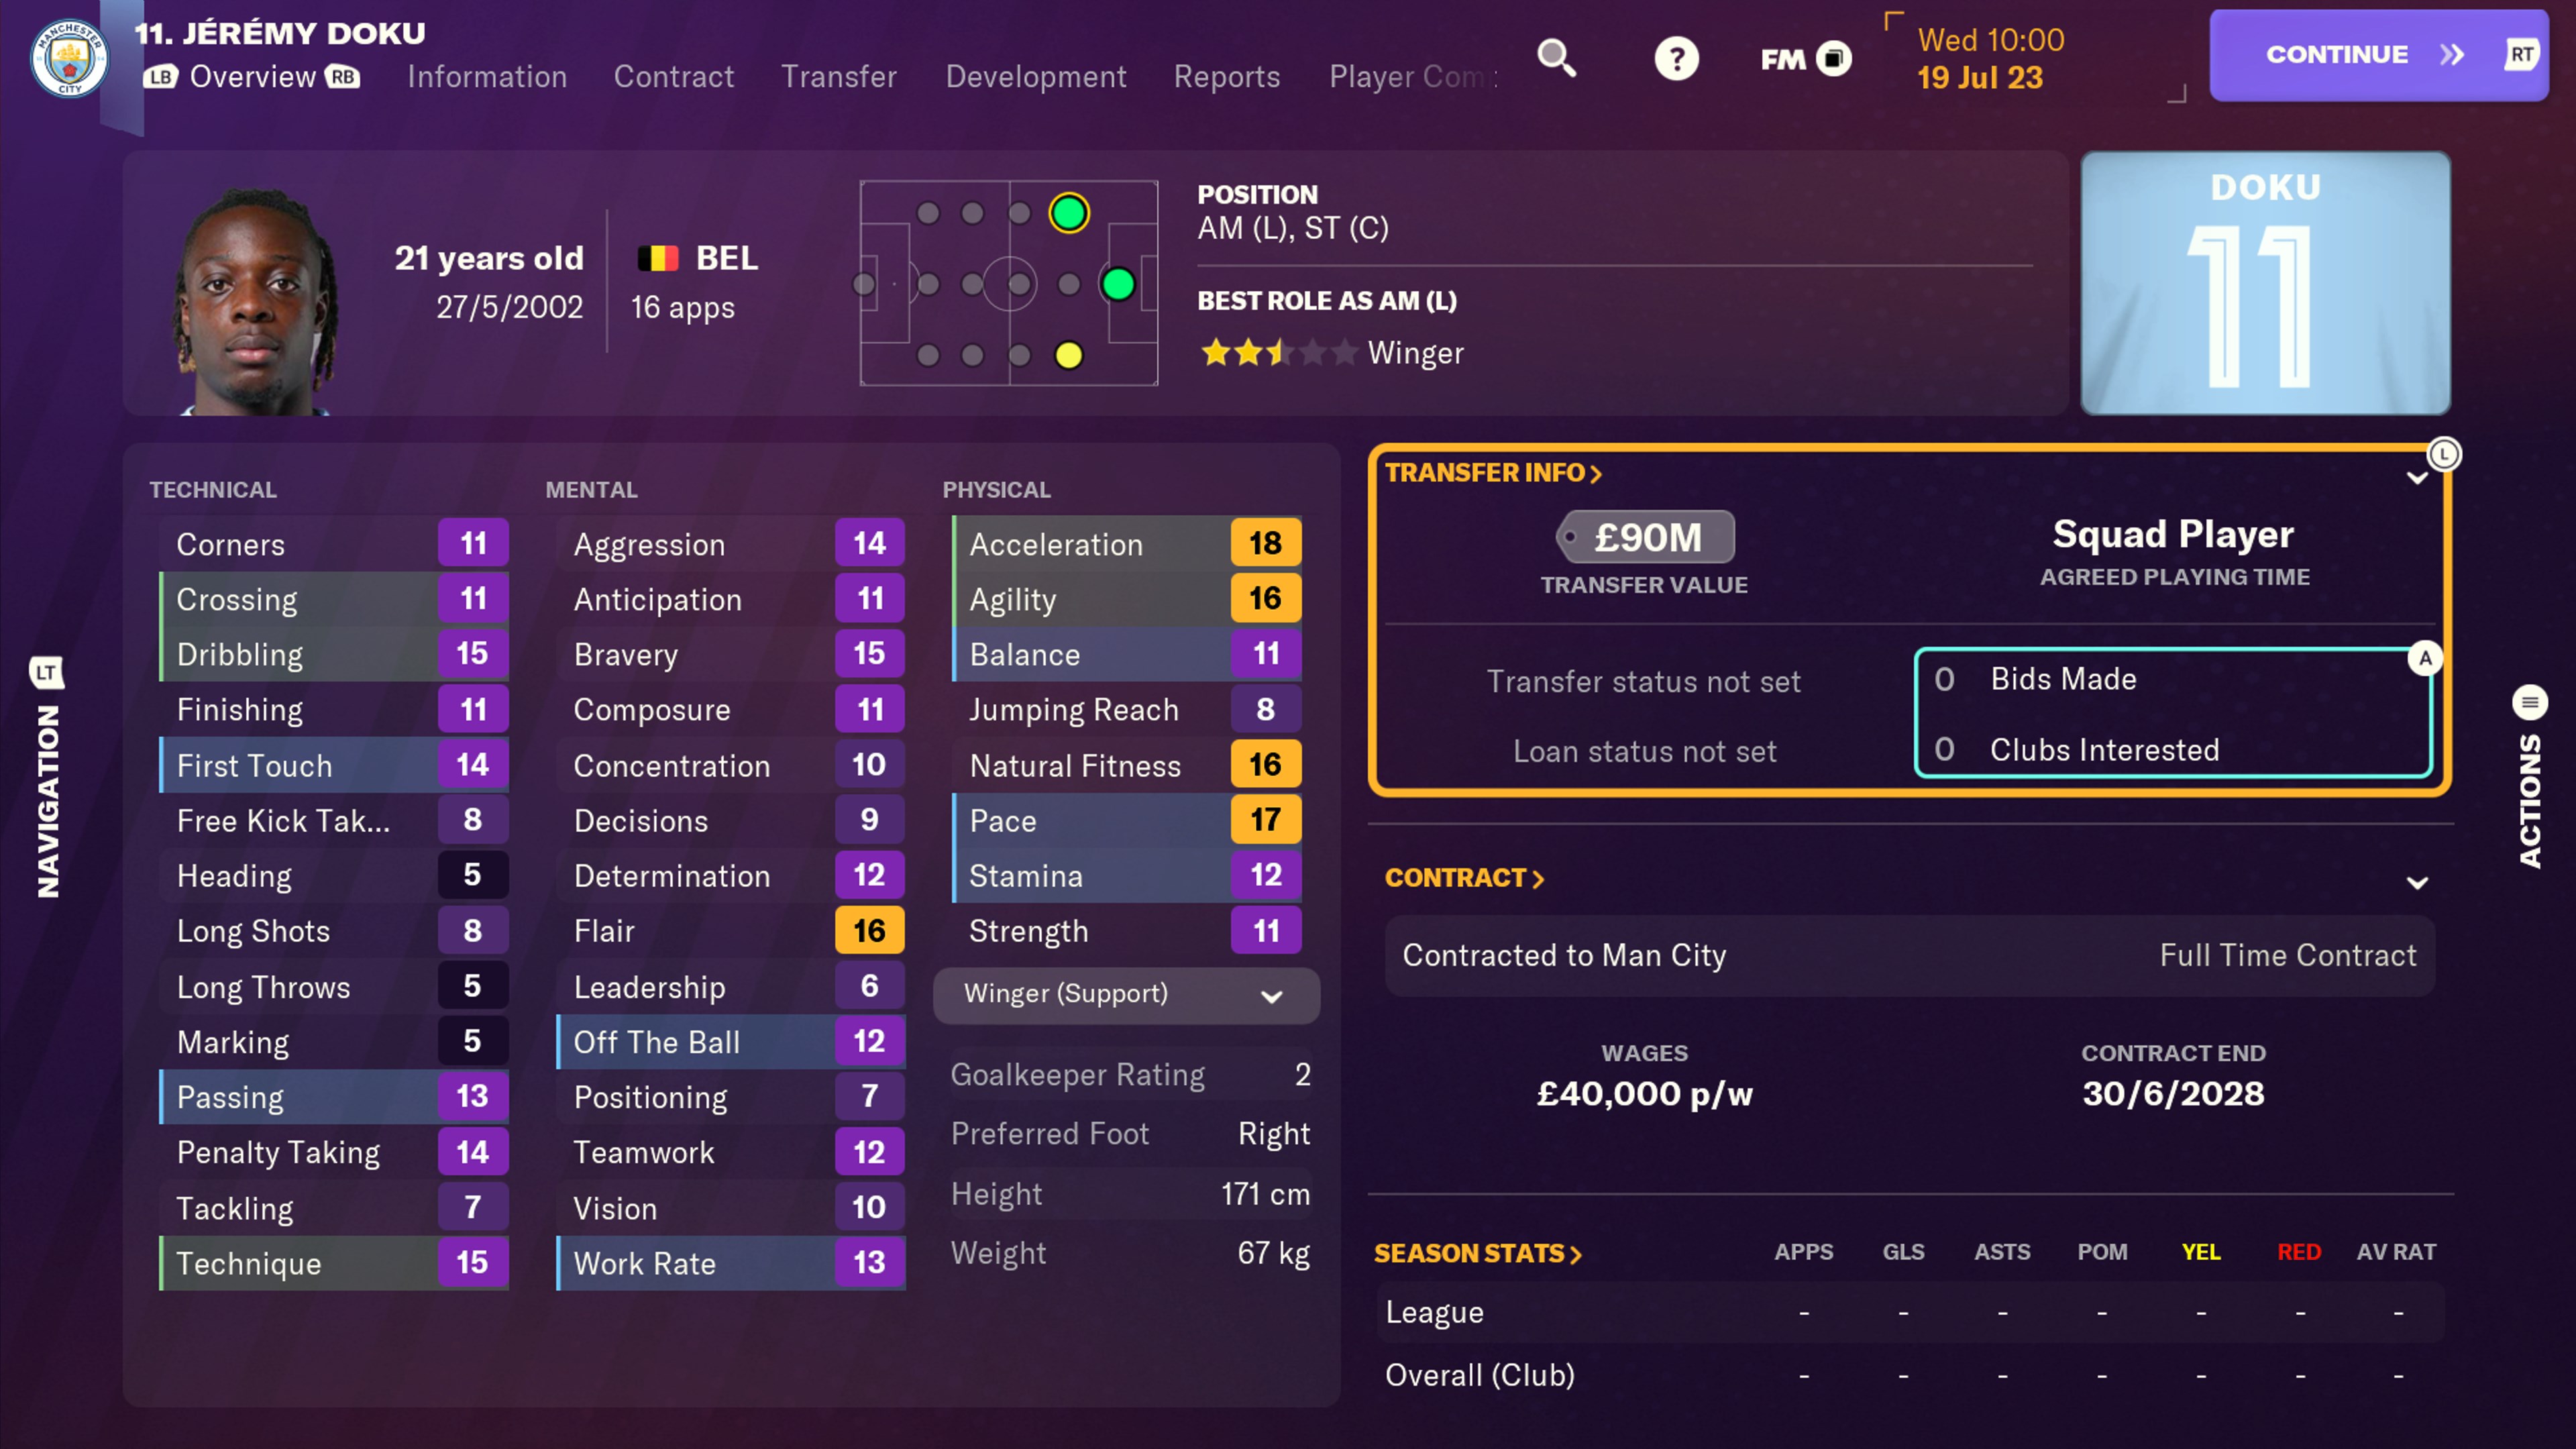 Football Manager 2024 Console on PS5 — price history, screenshots